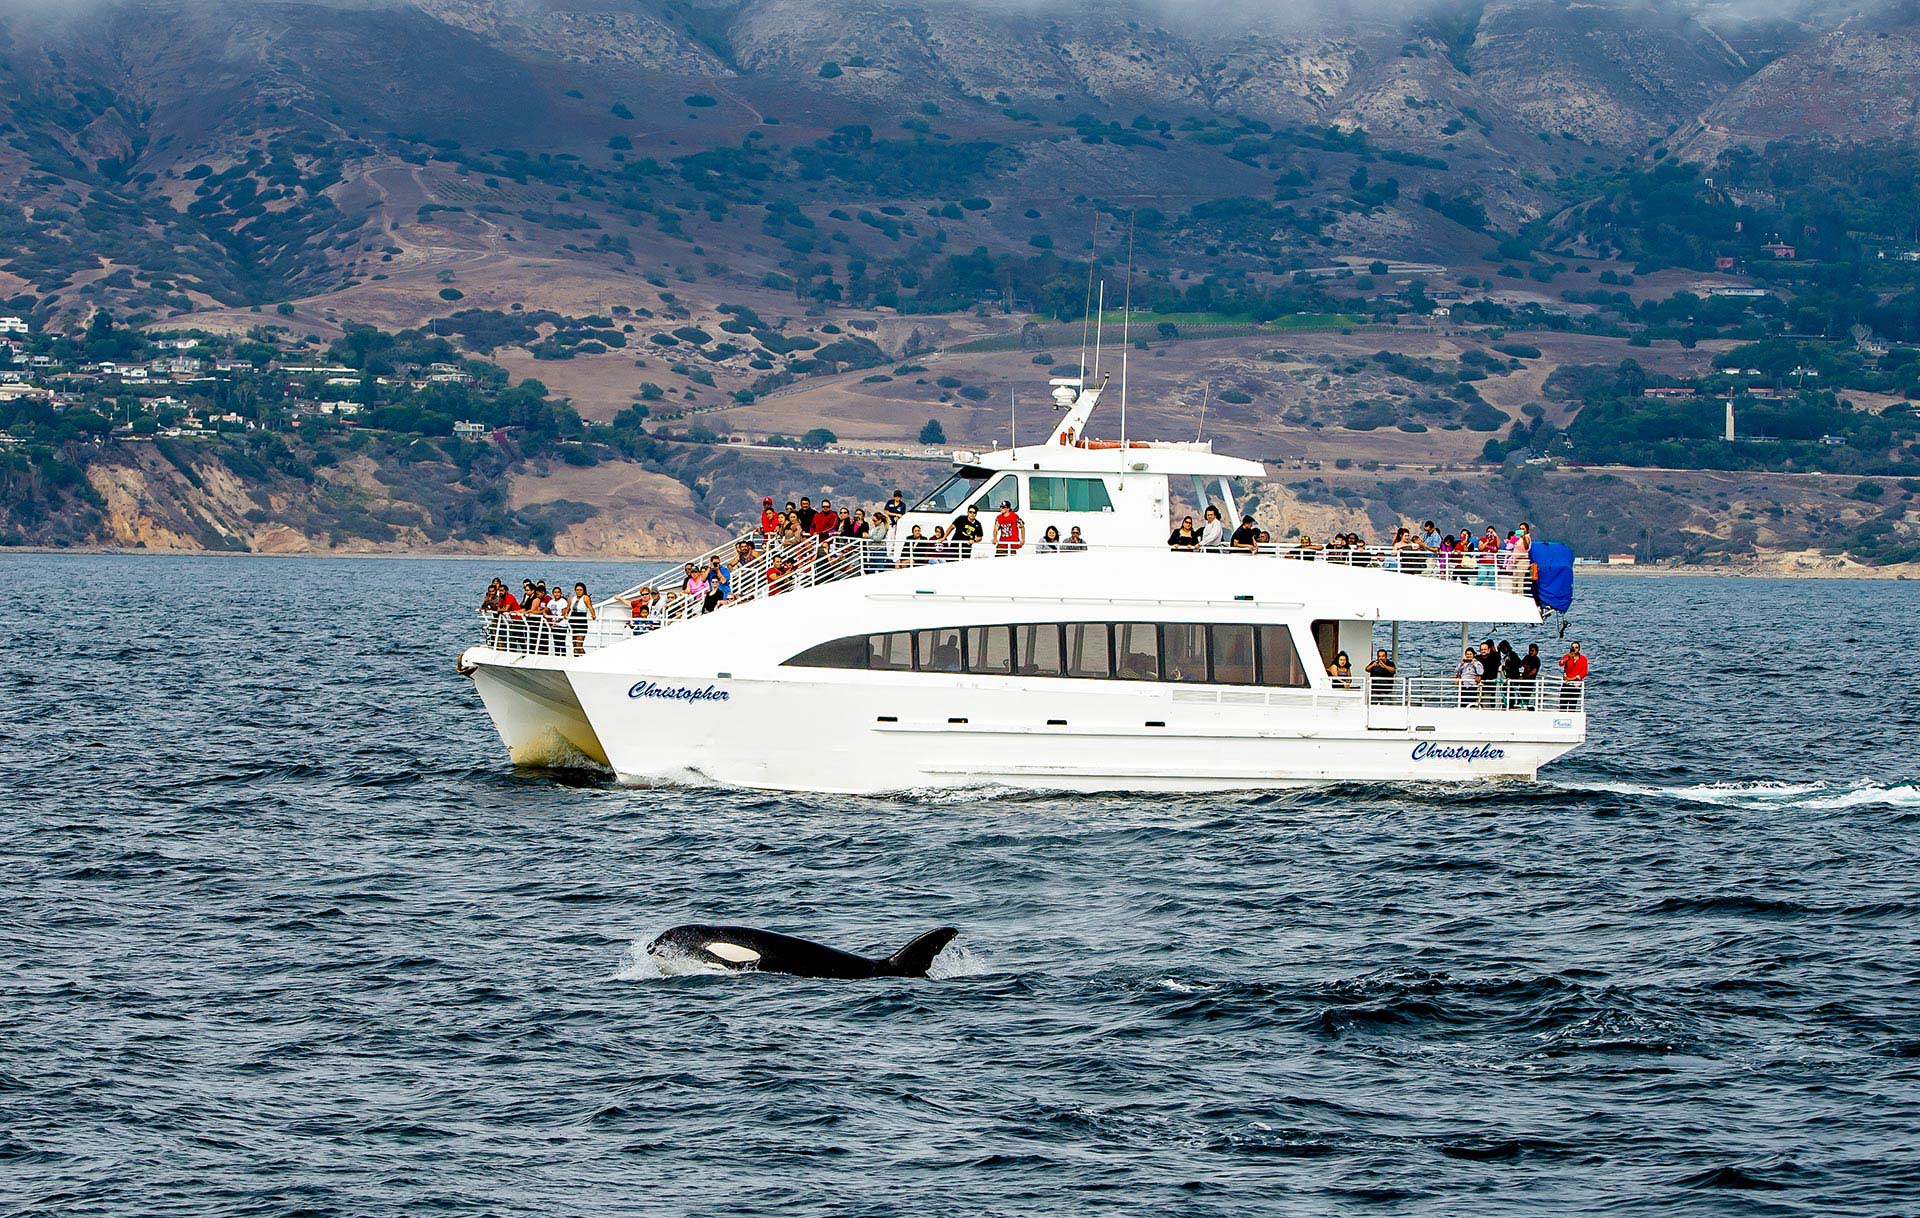 boat of people watching whales in los angeles